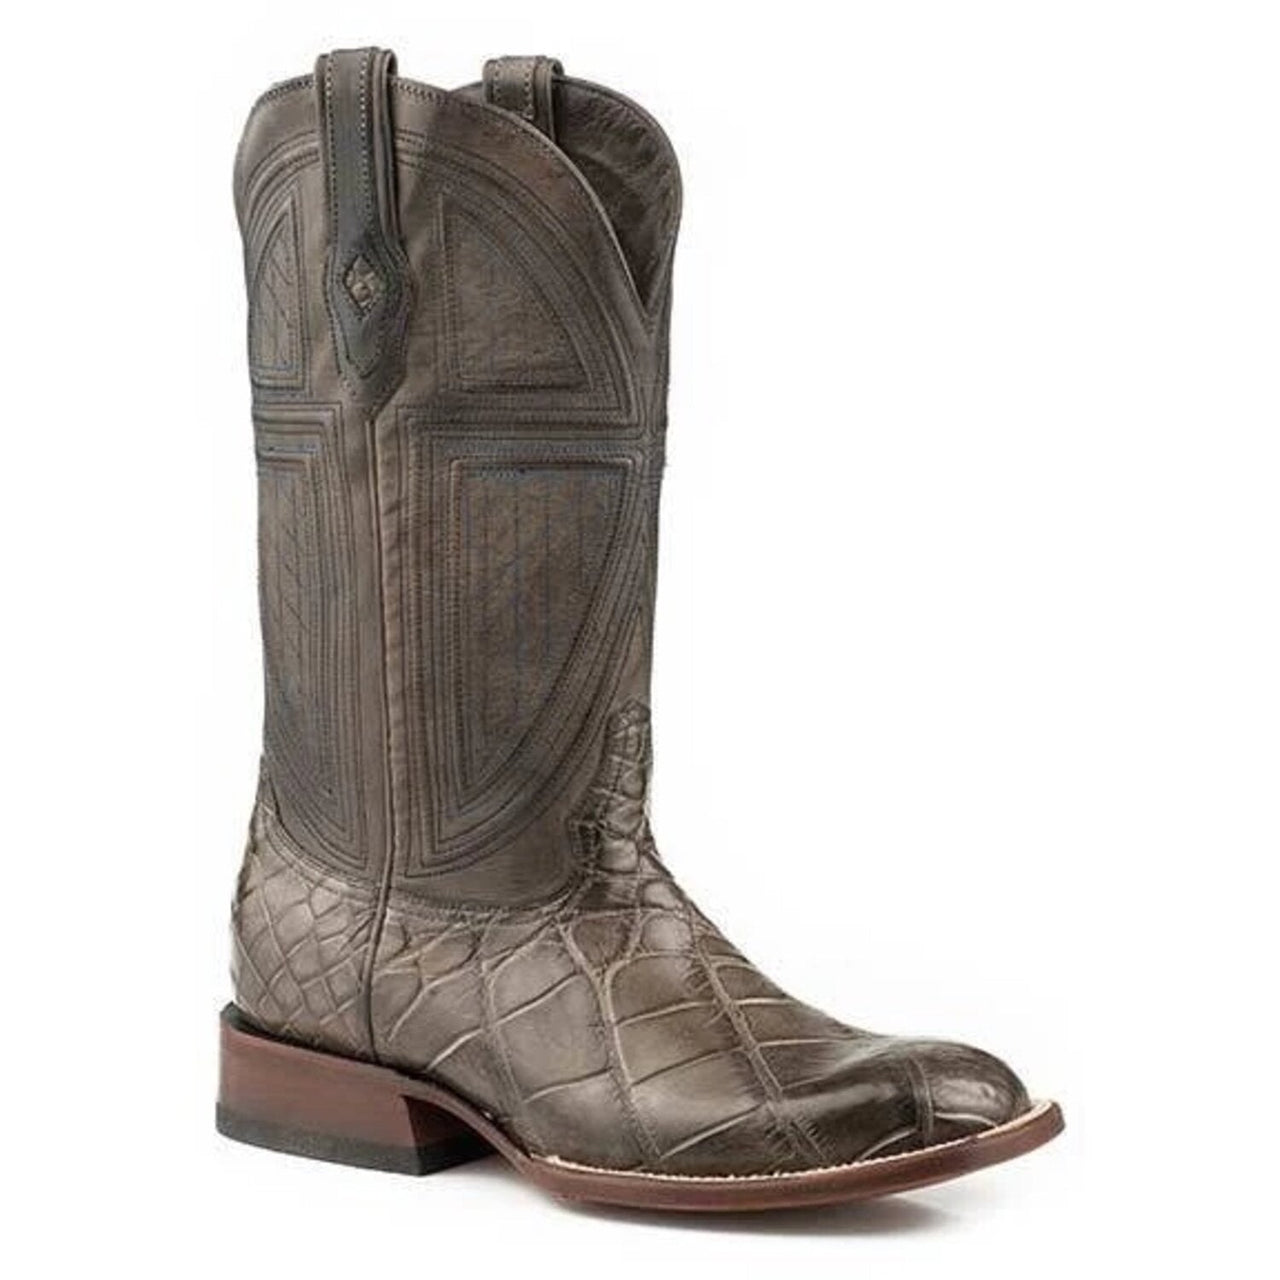 Men's Stetson Grator Alligator Boots Square Toe Handcrafted JBS Collection Gray - yeehawcowboy